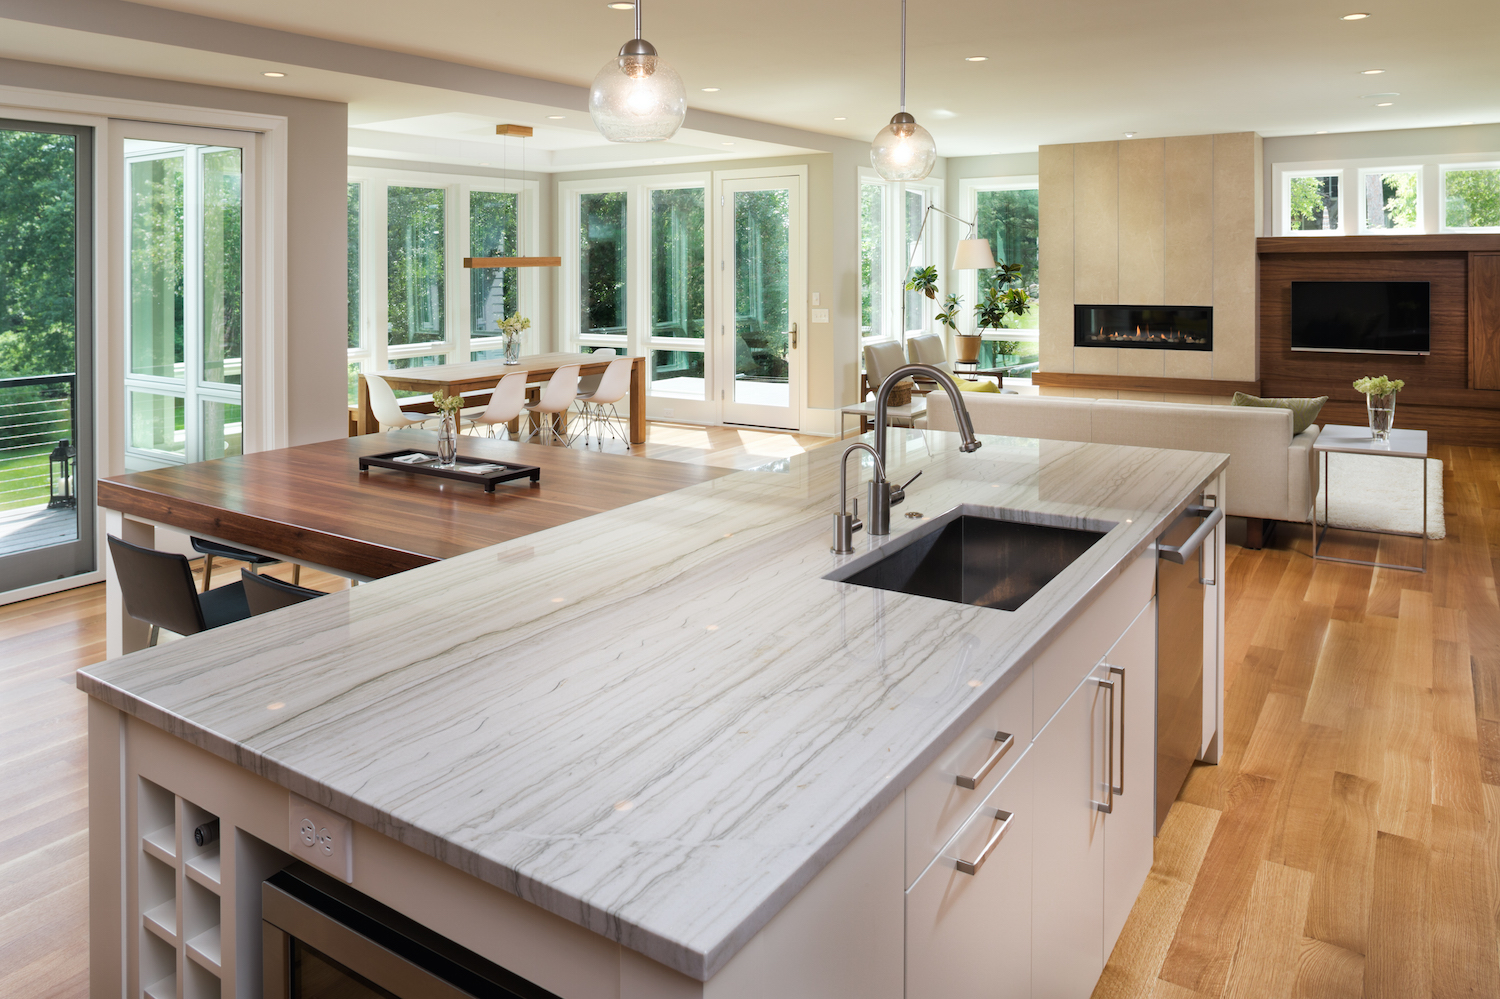 Quartz Countertop Information That Is Essential In Your Kitchen Redesign » Residence Style